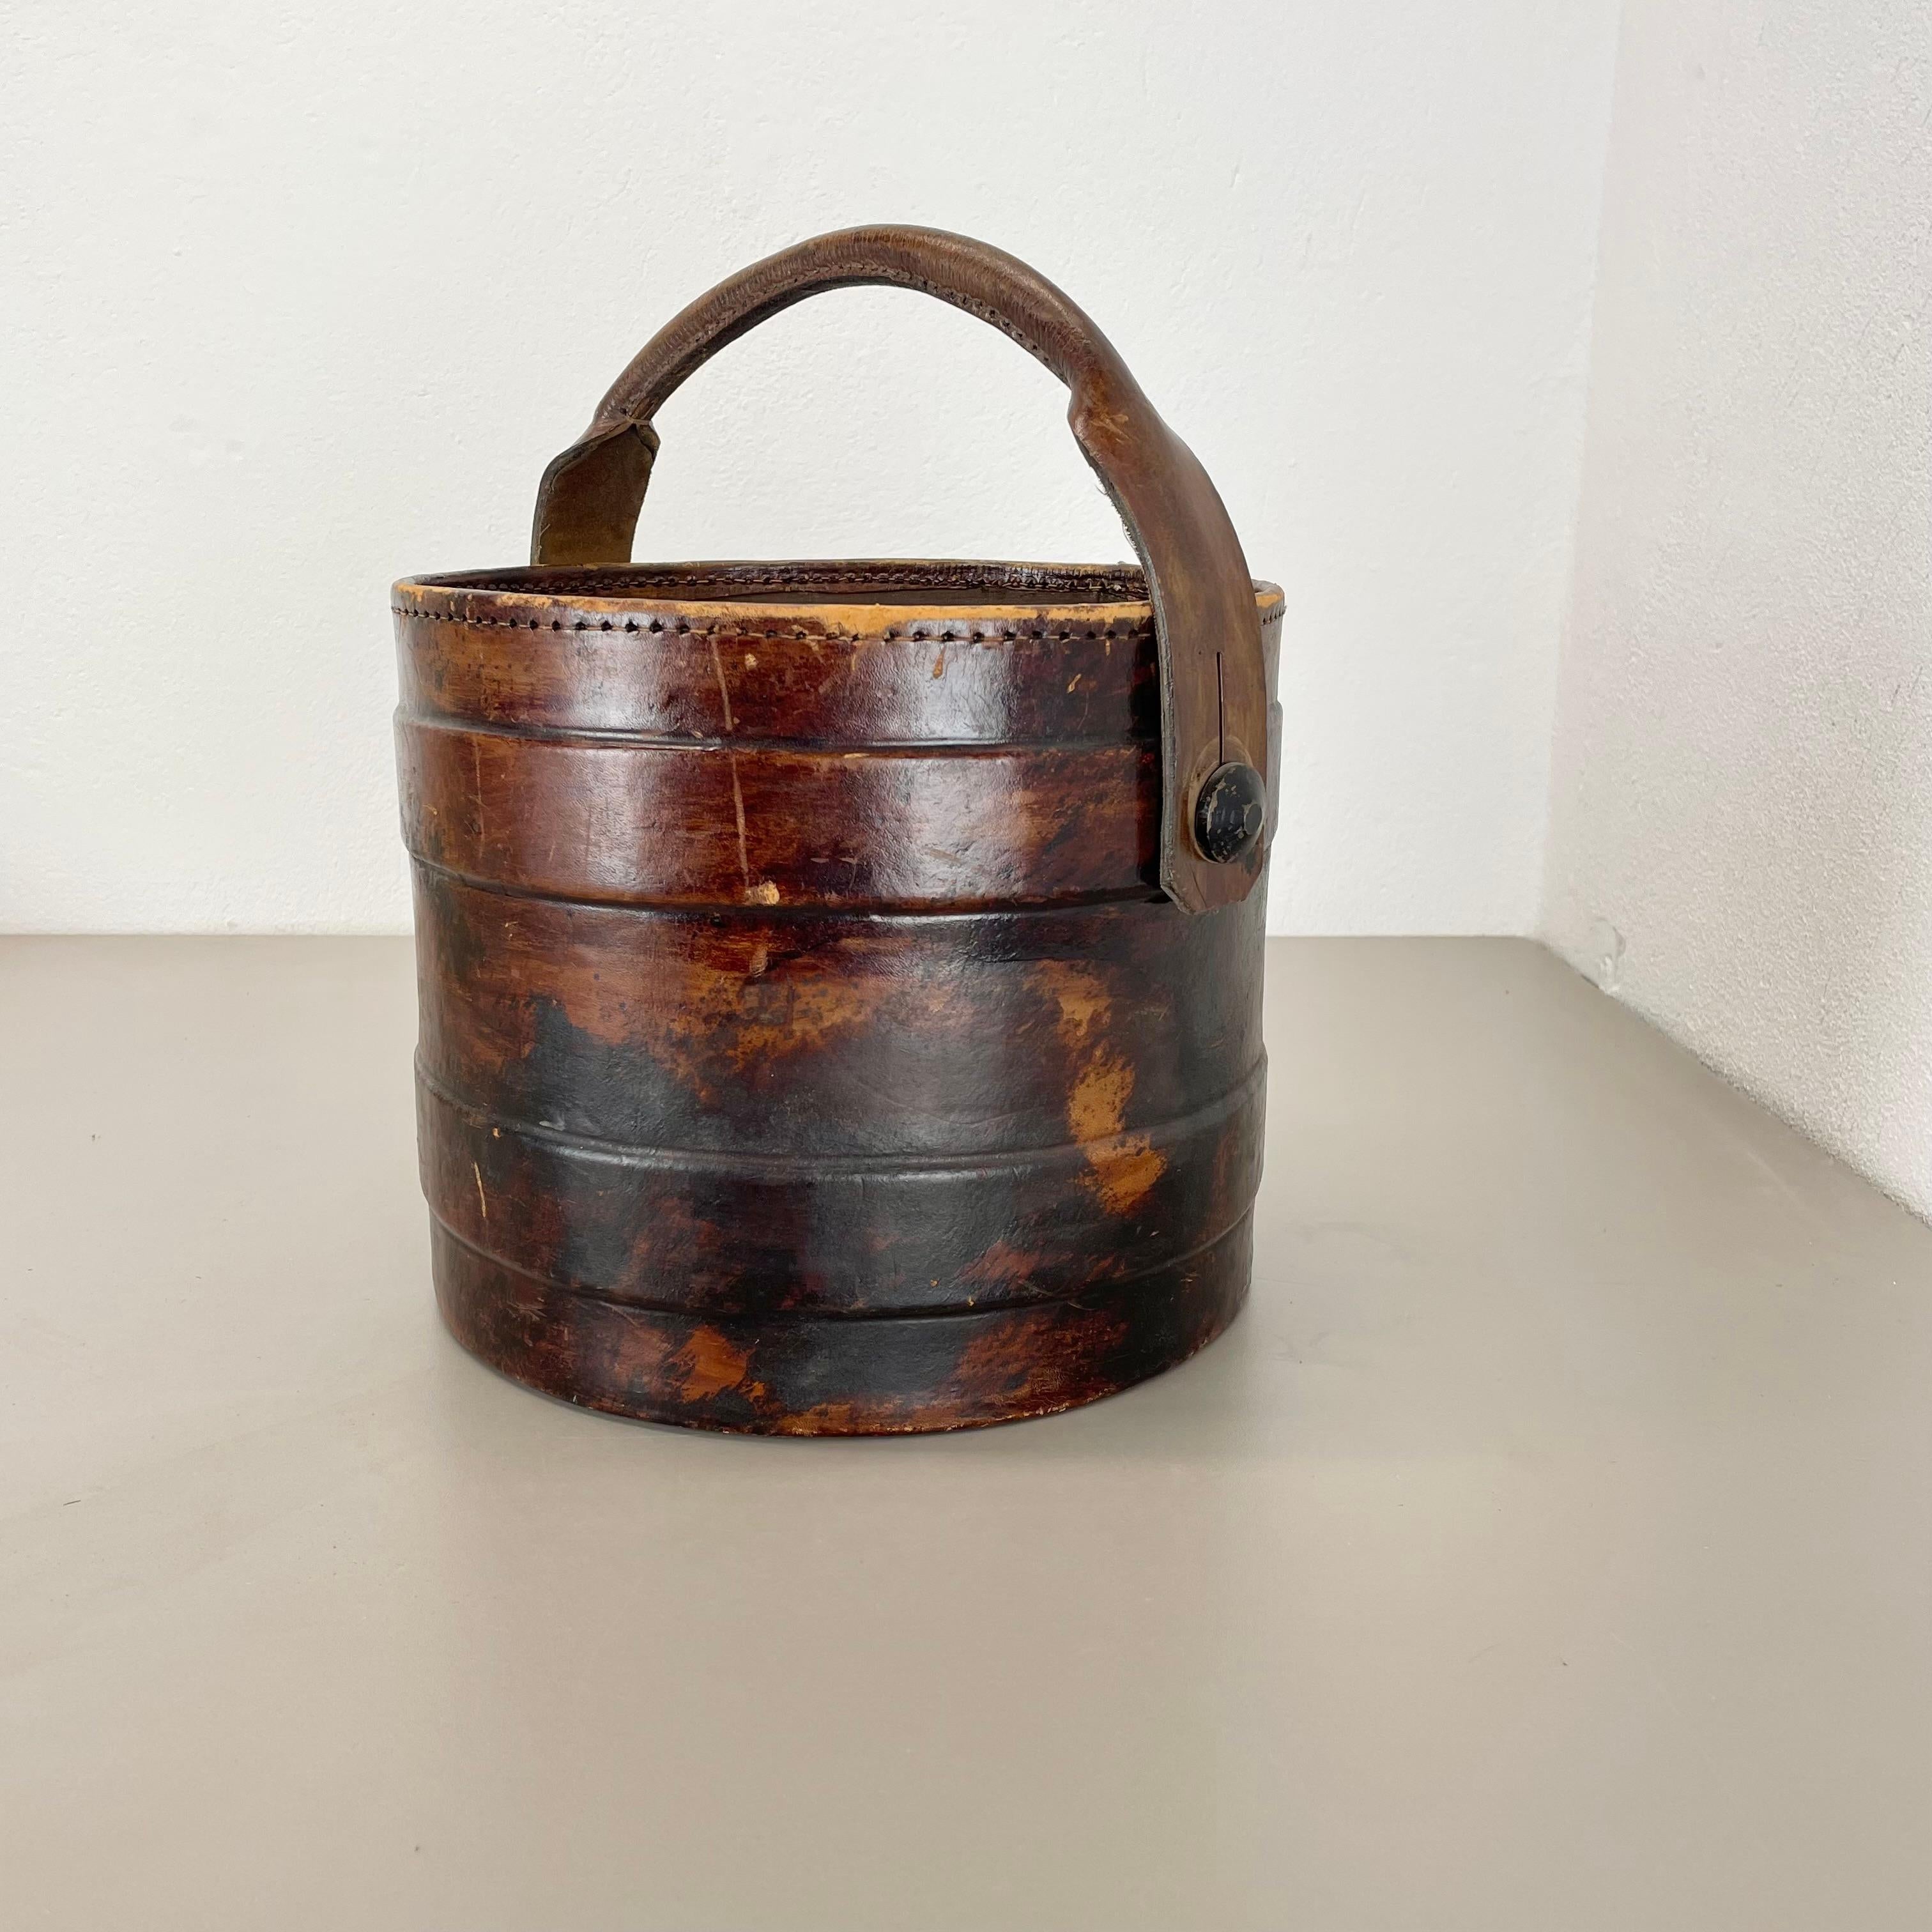 Article: Waste bin paper bin

Origin: Italy (design and production), Argentina (leather)

Age: 1970s



This original vintage Hollywood Regency waste bin paper bin was produced in the 1970s in Italy. it is made of real leather, which has its origin